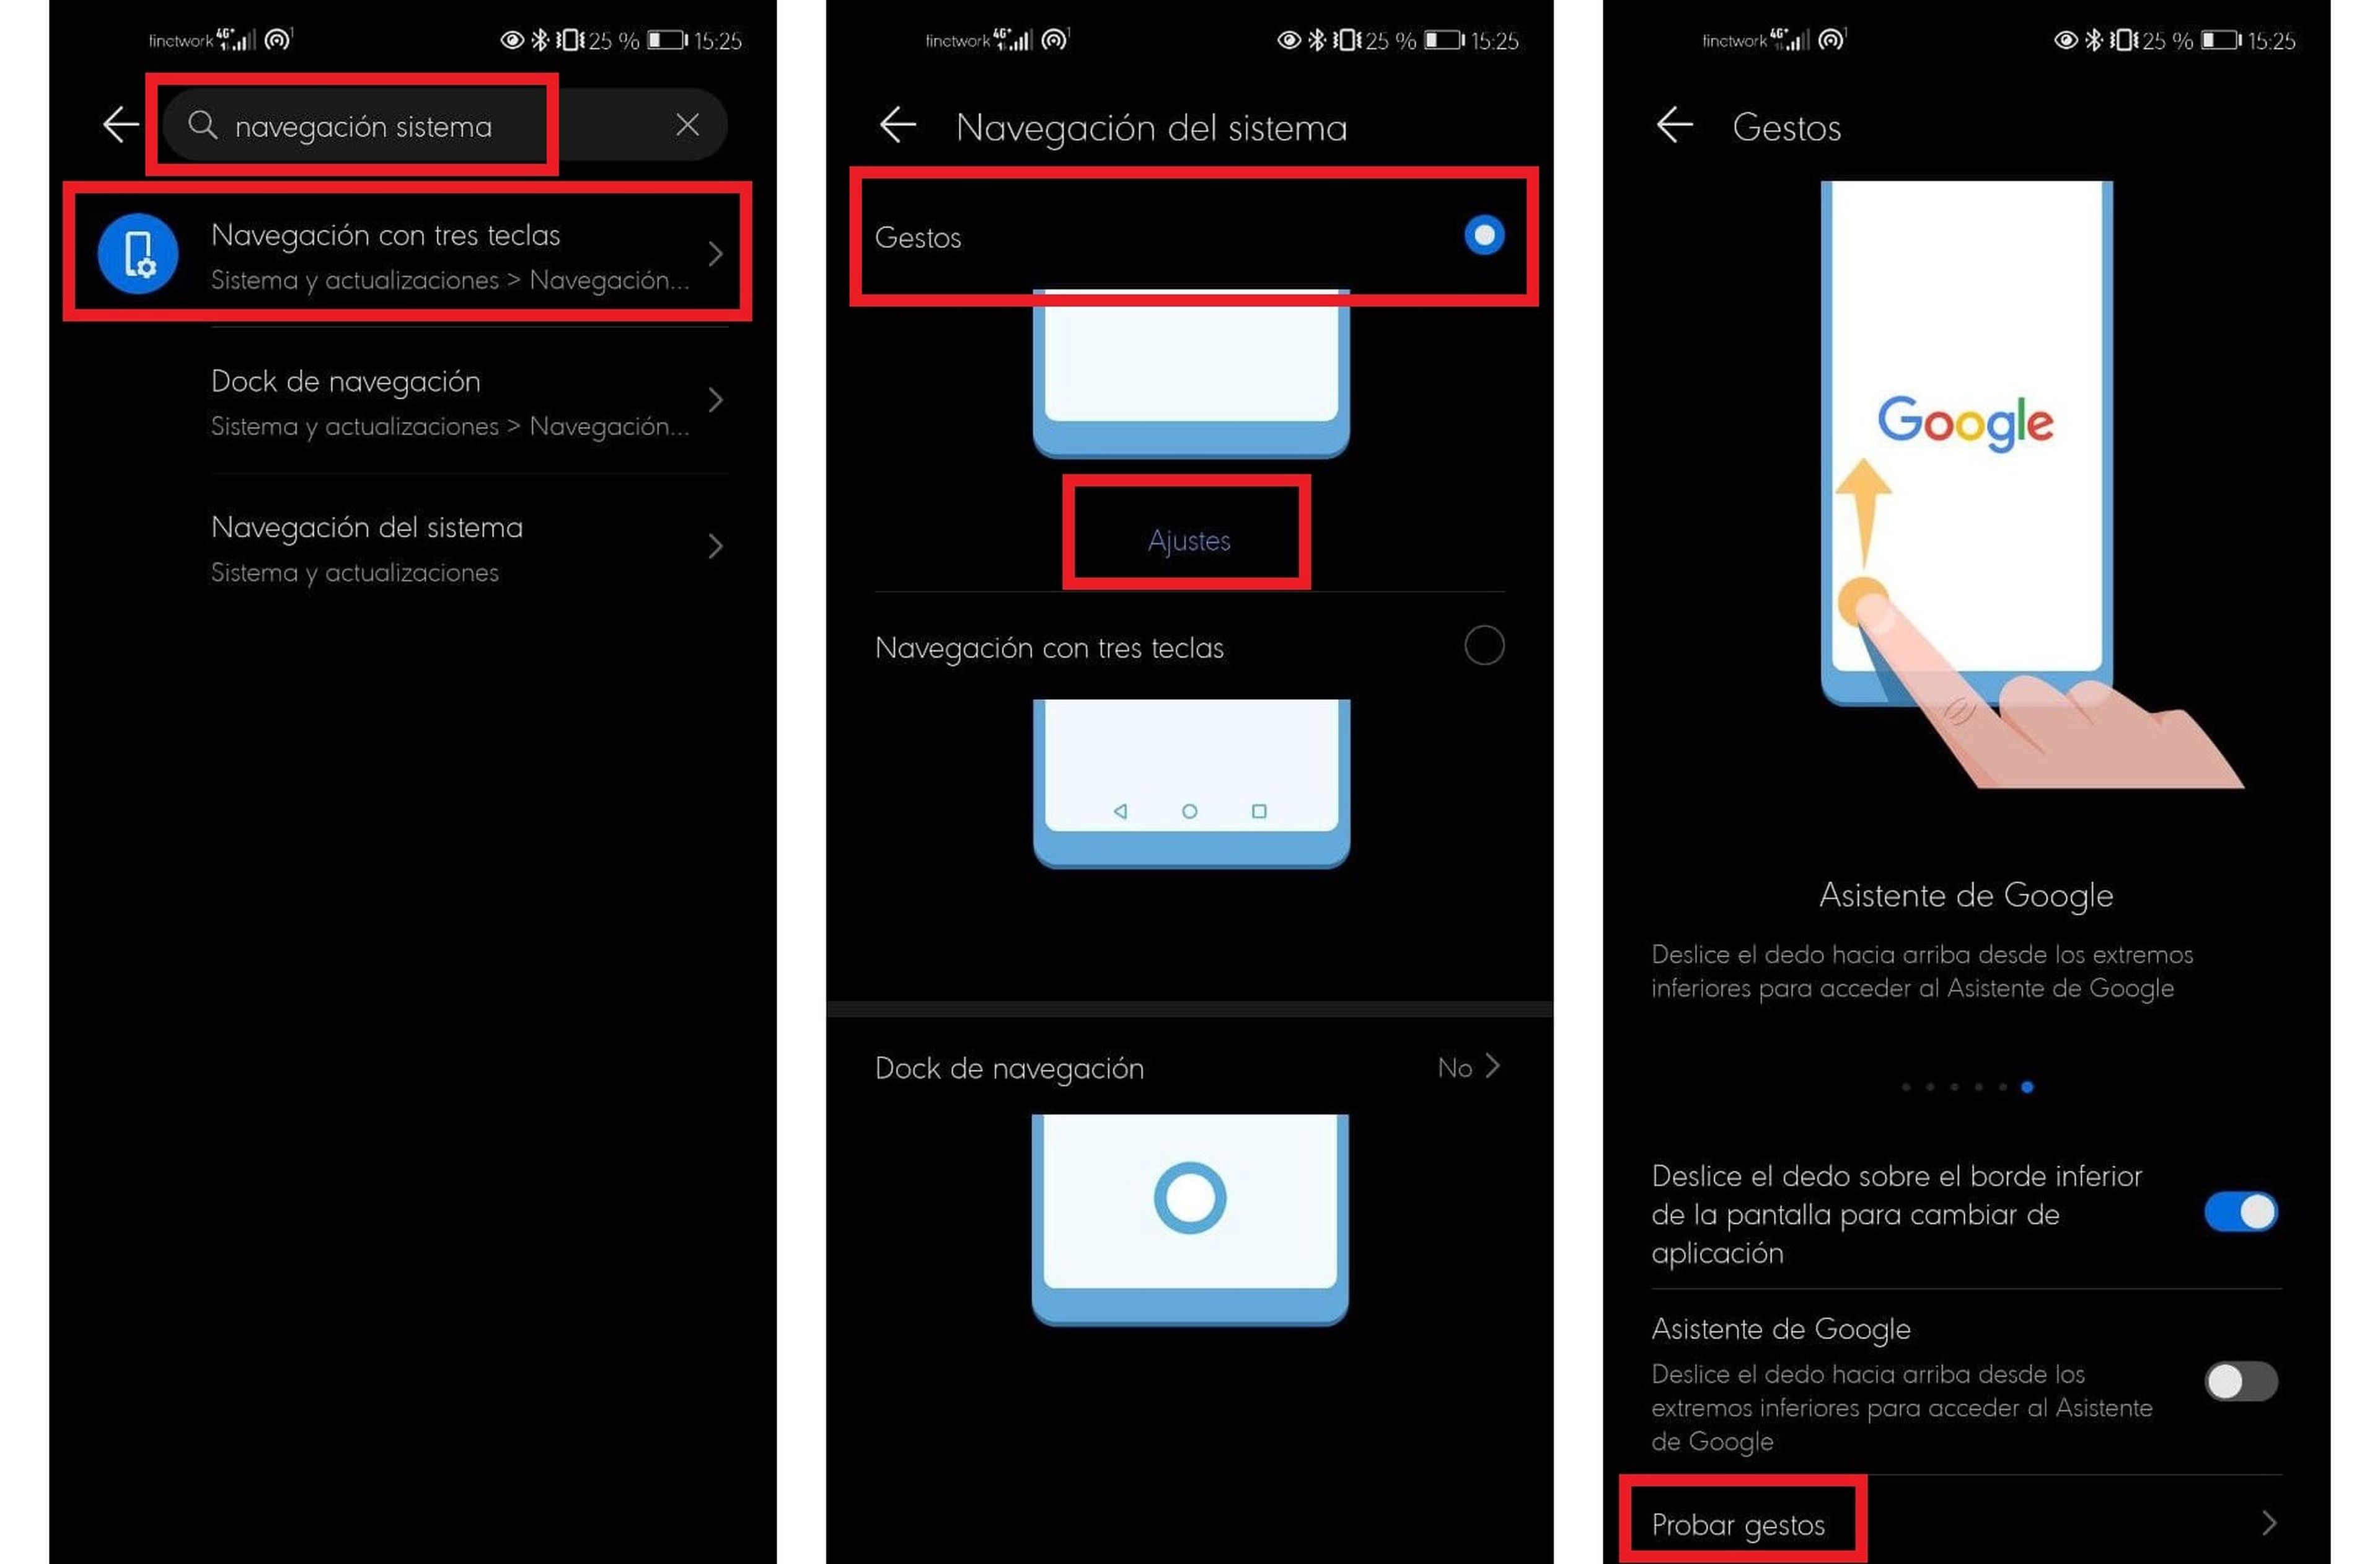 How to activate gesture navigation on Android